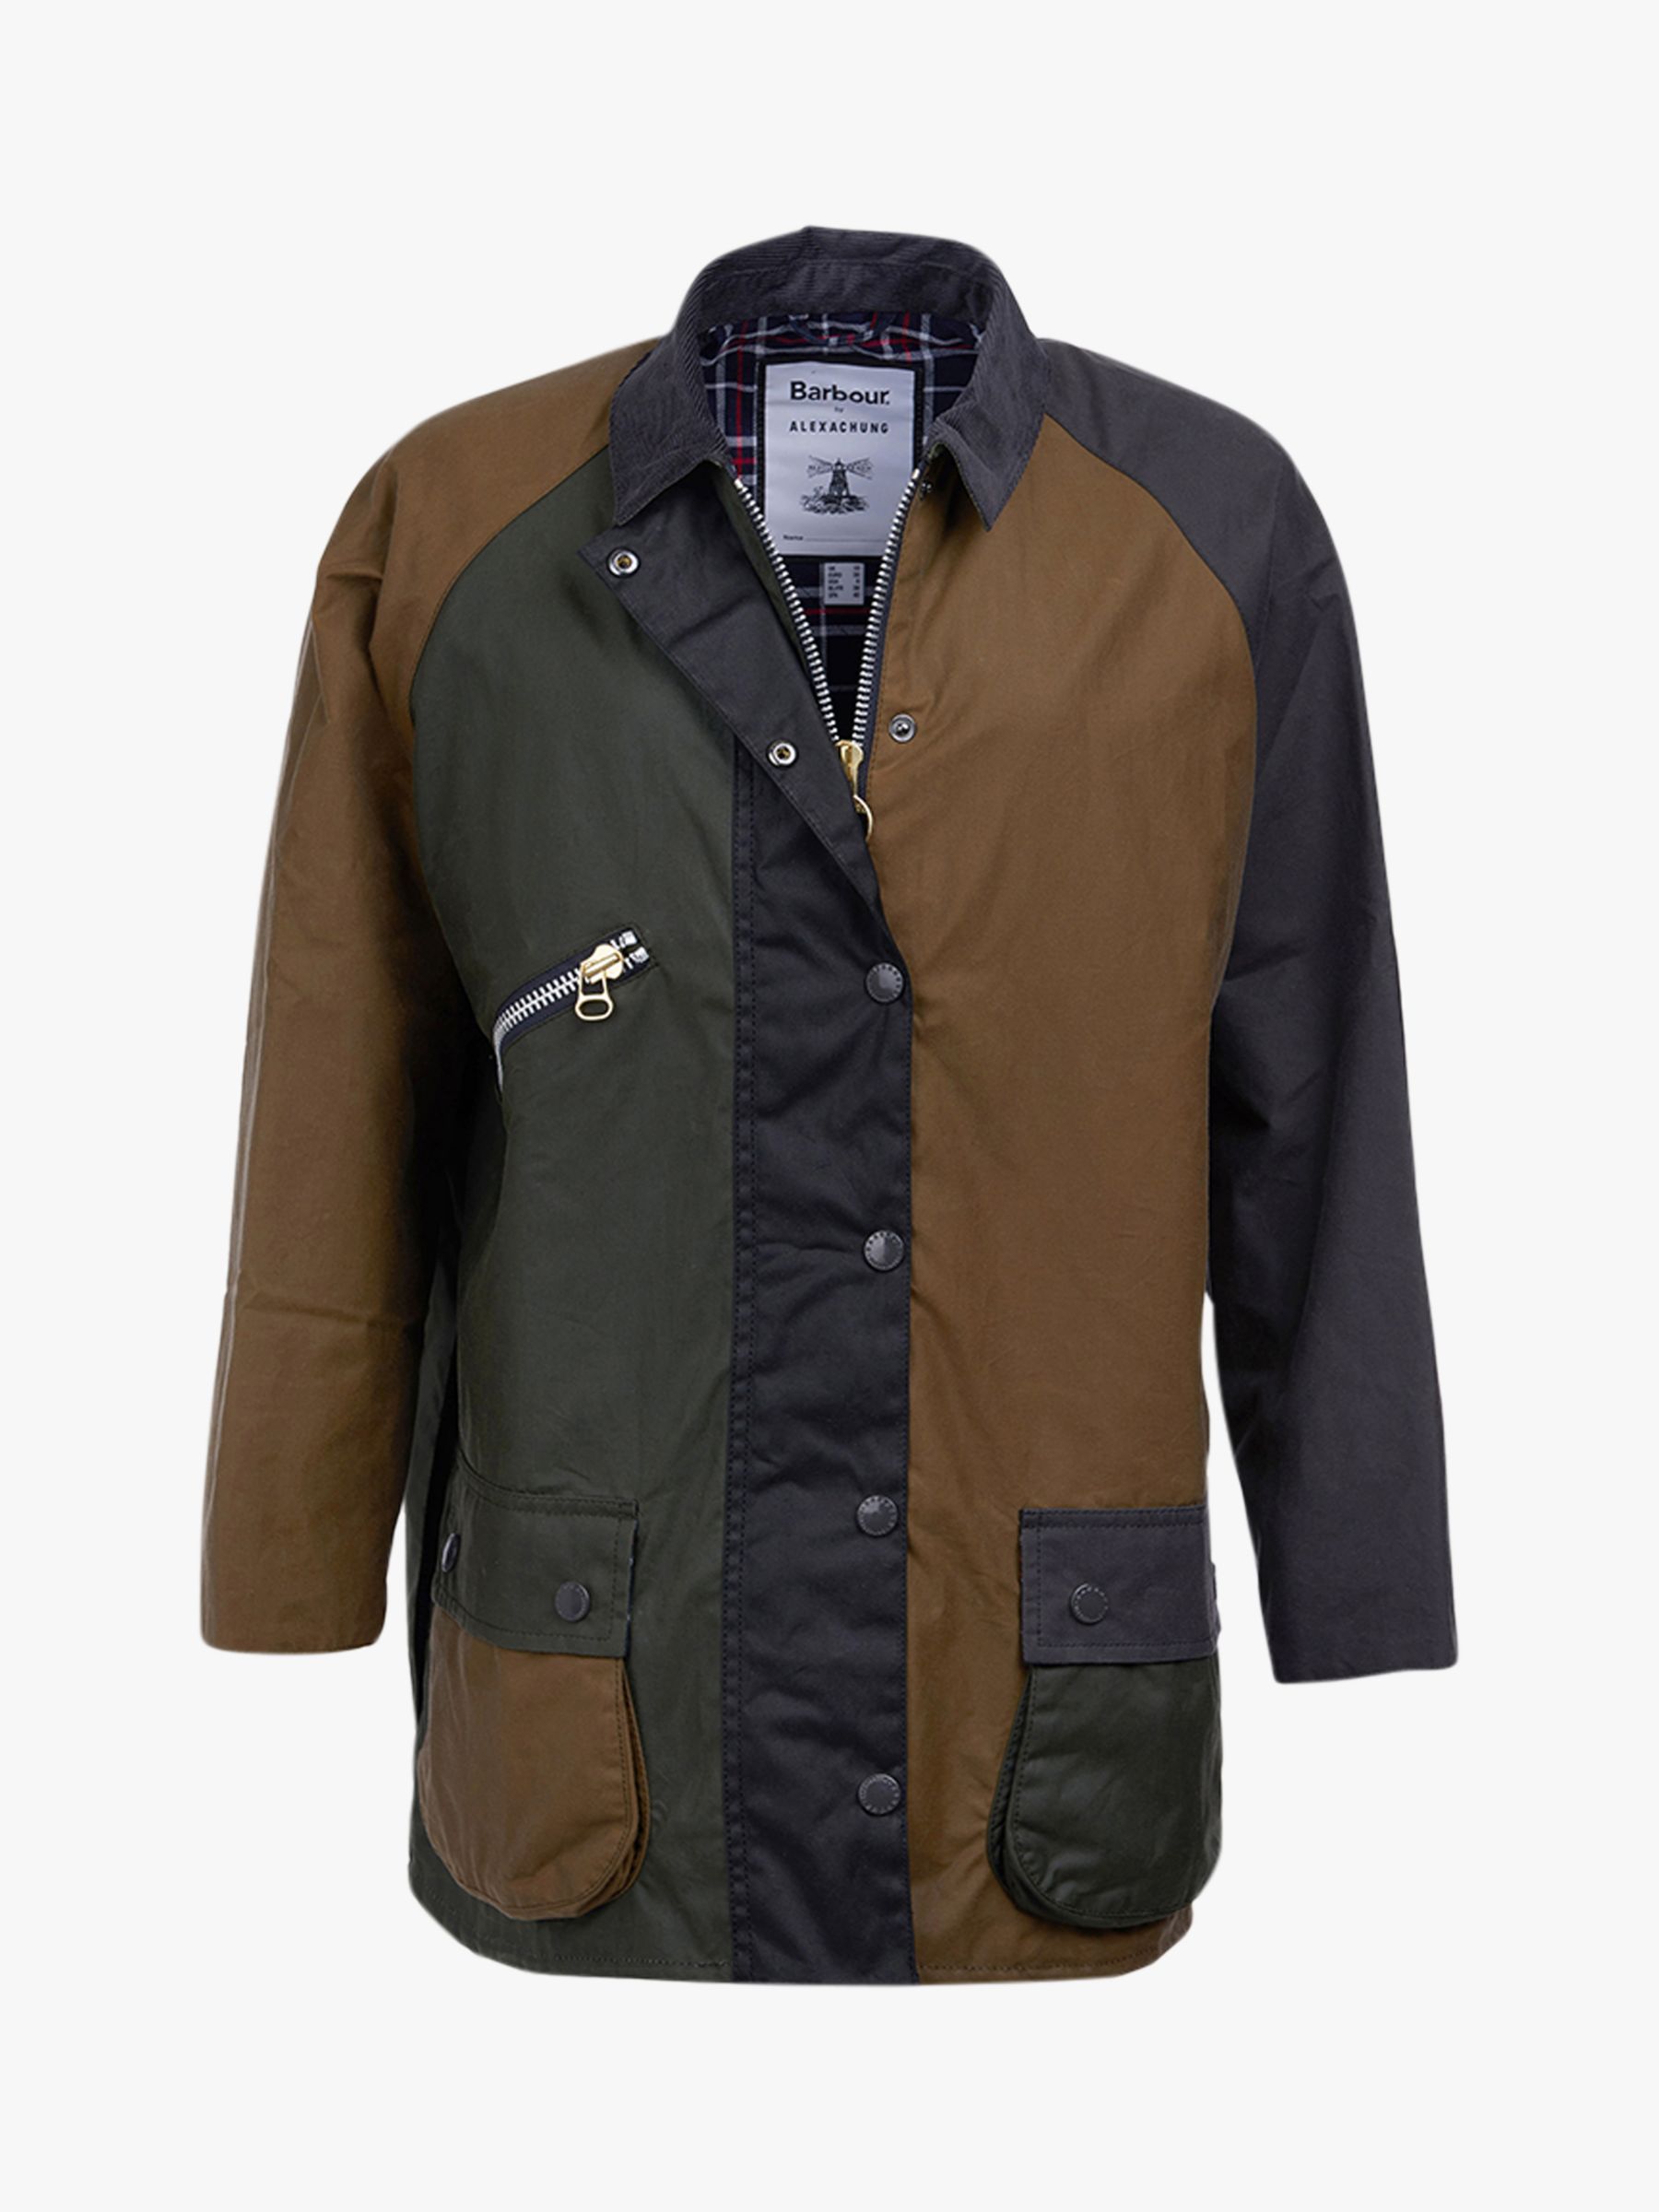 barbour iron on patch